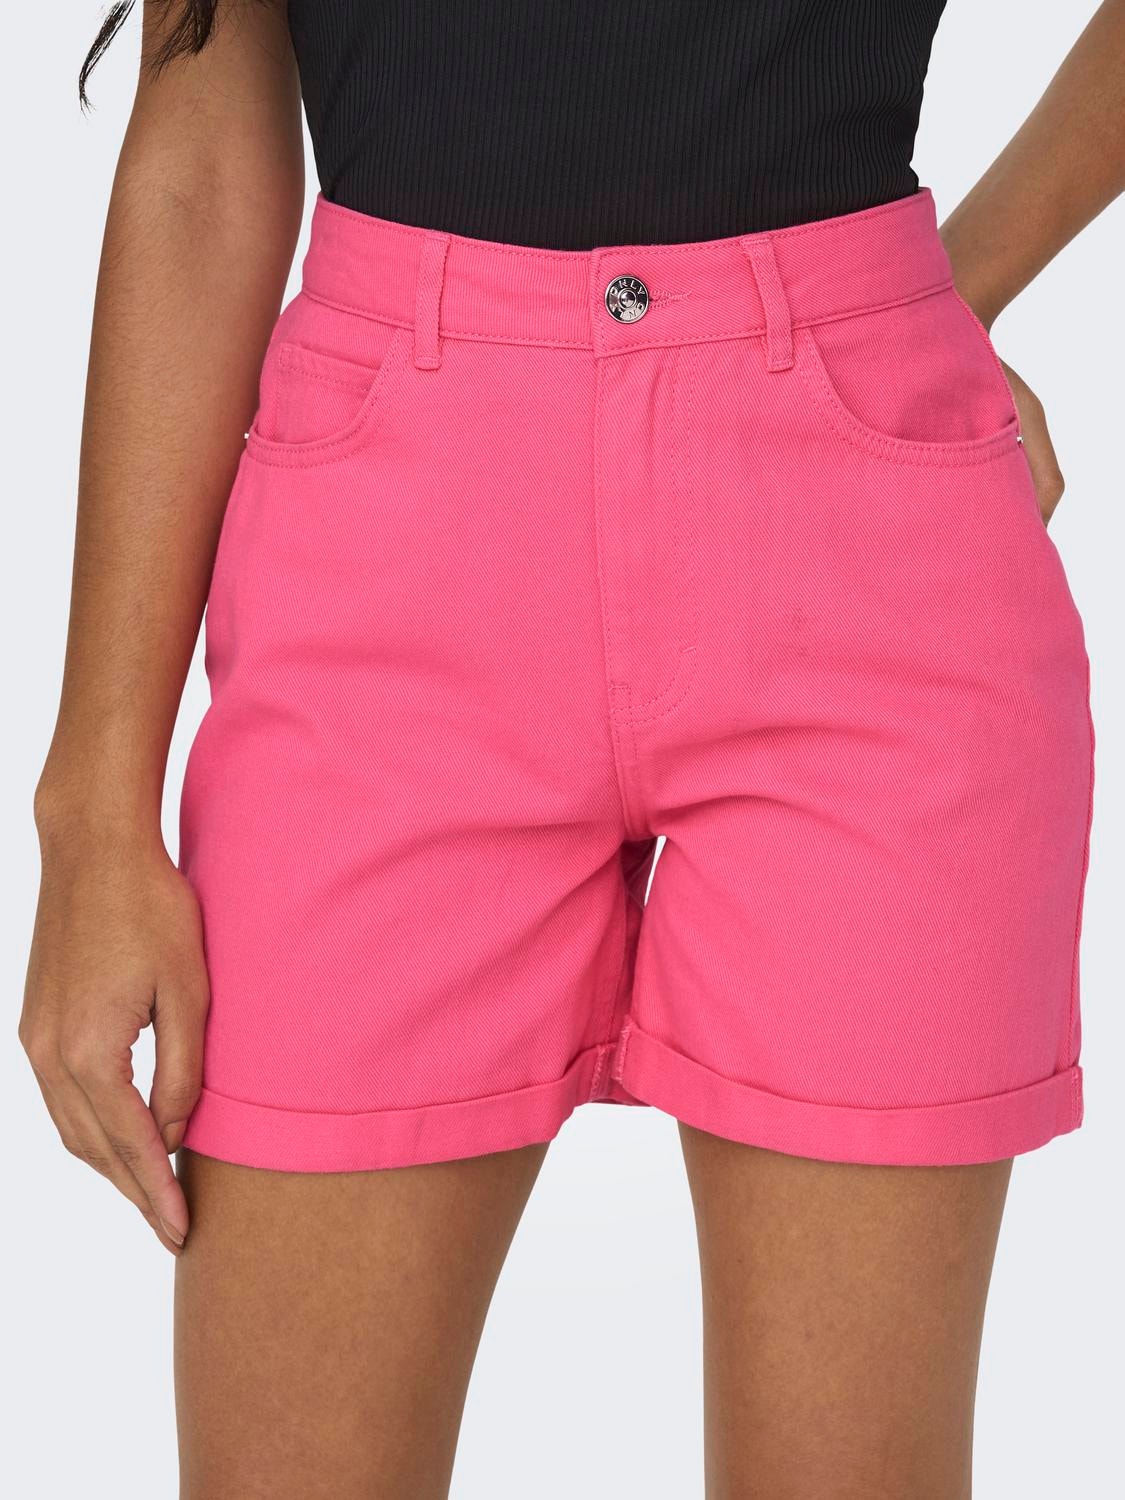 ONLY Mom Fit High waist Fold-up hems Shorts -Camellia Rose - 15255951